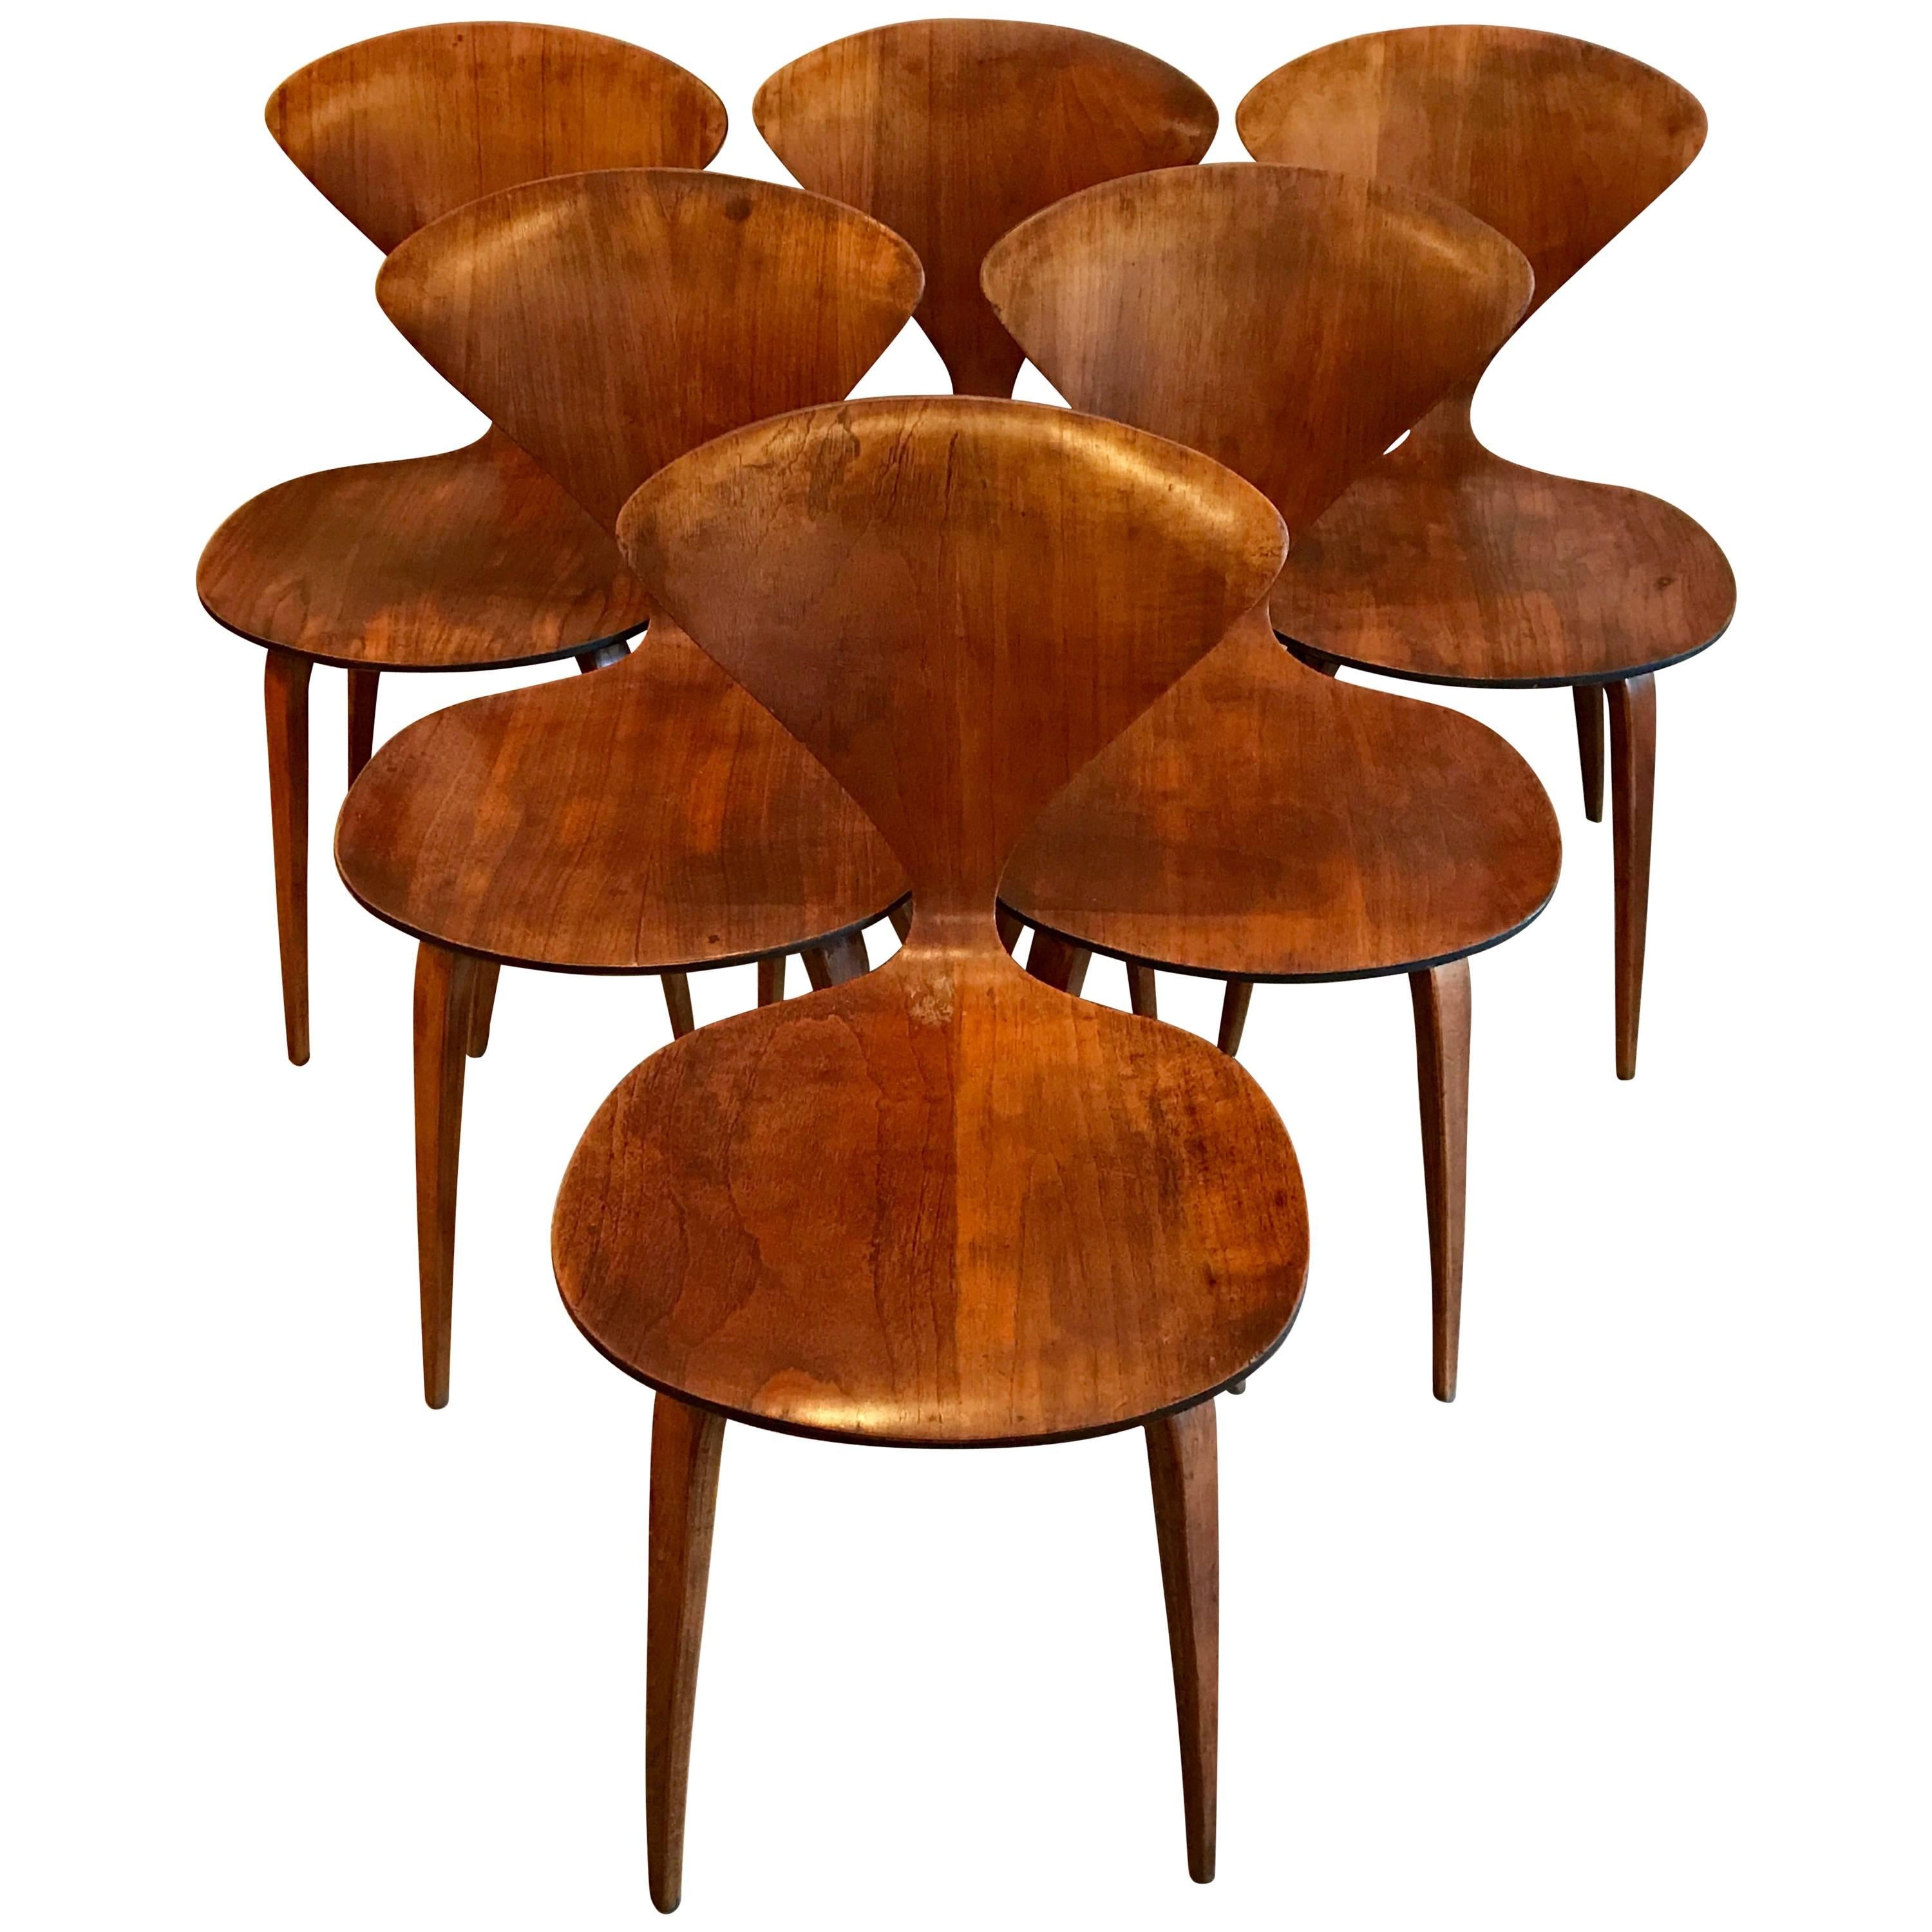 Six Bentwood Walnut Dining Chairs by Norman Cherner for Plycraft, 1950s